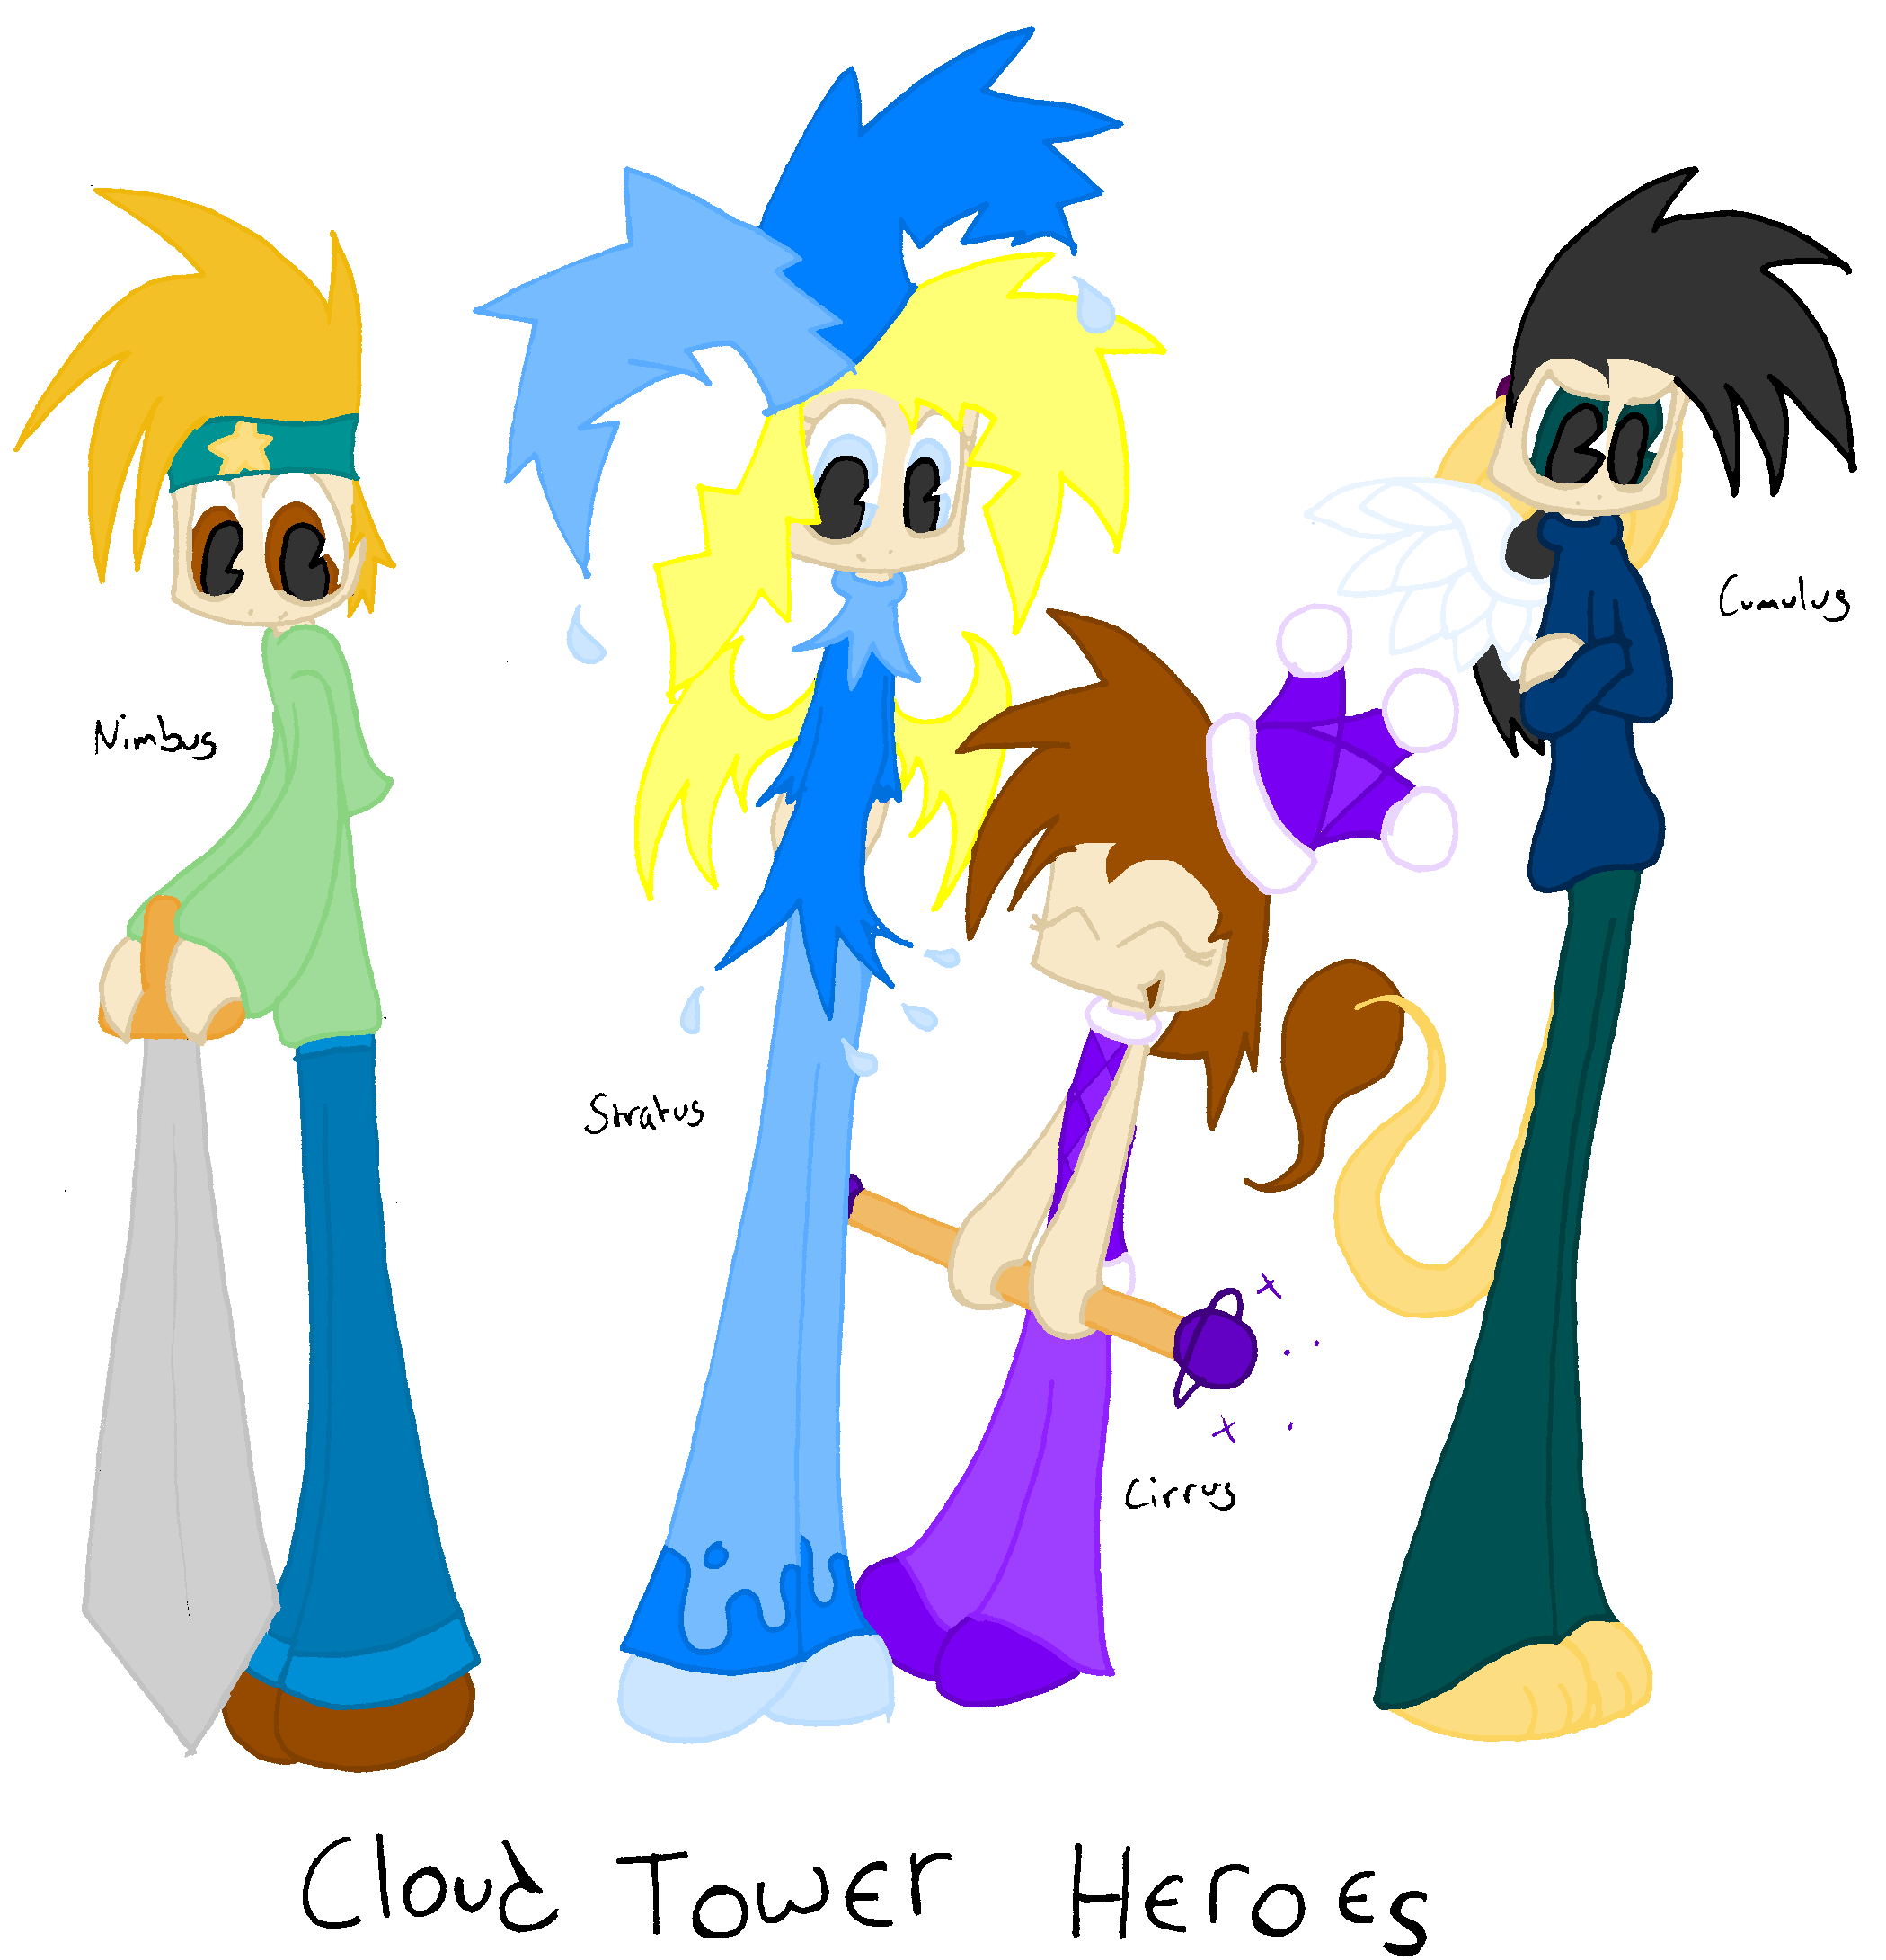 The Heroes of Cloud Tower by x_Tess_The_Slorg_x